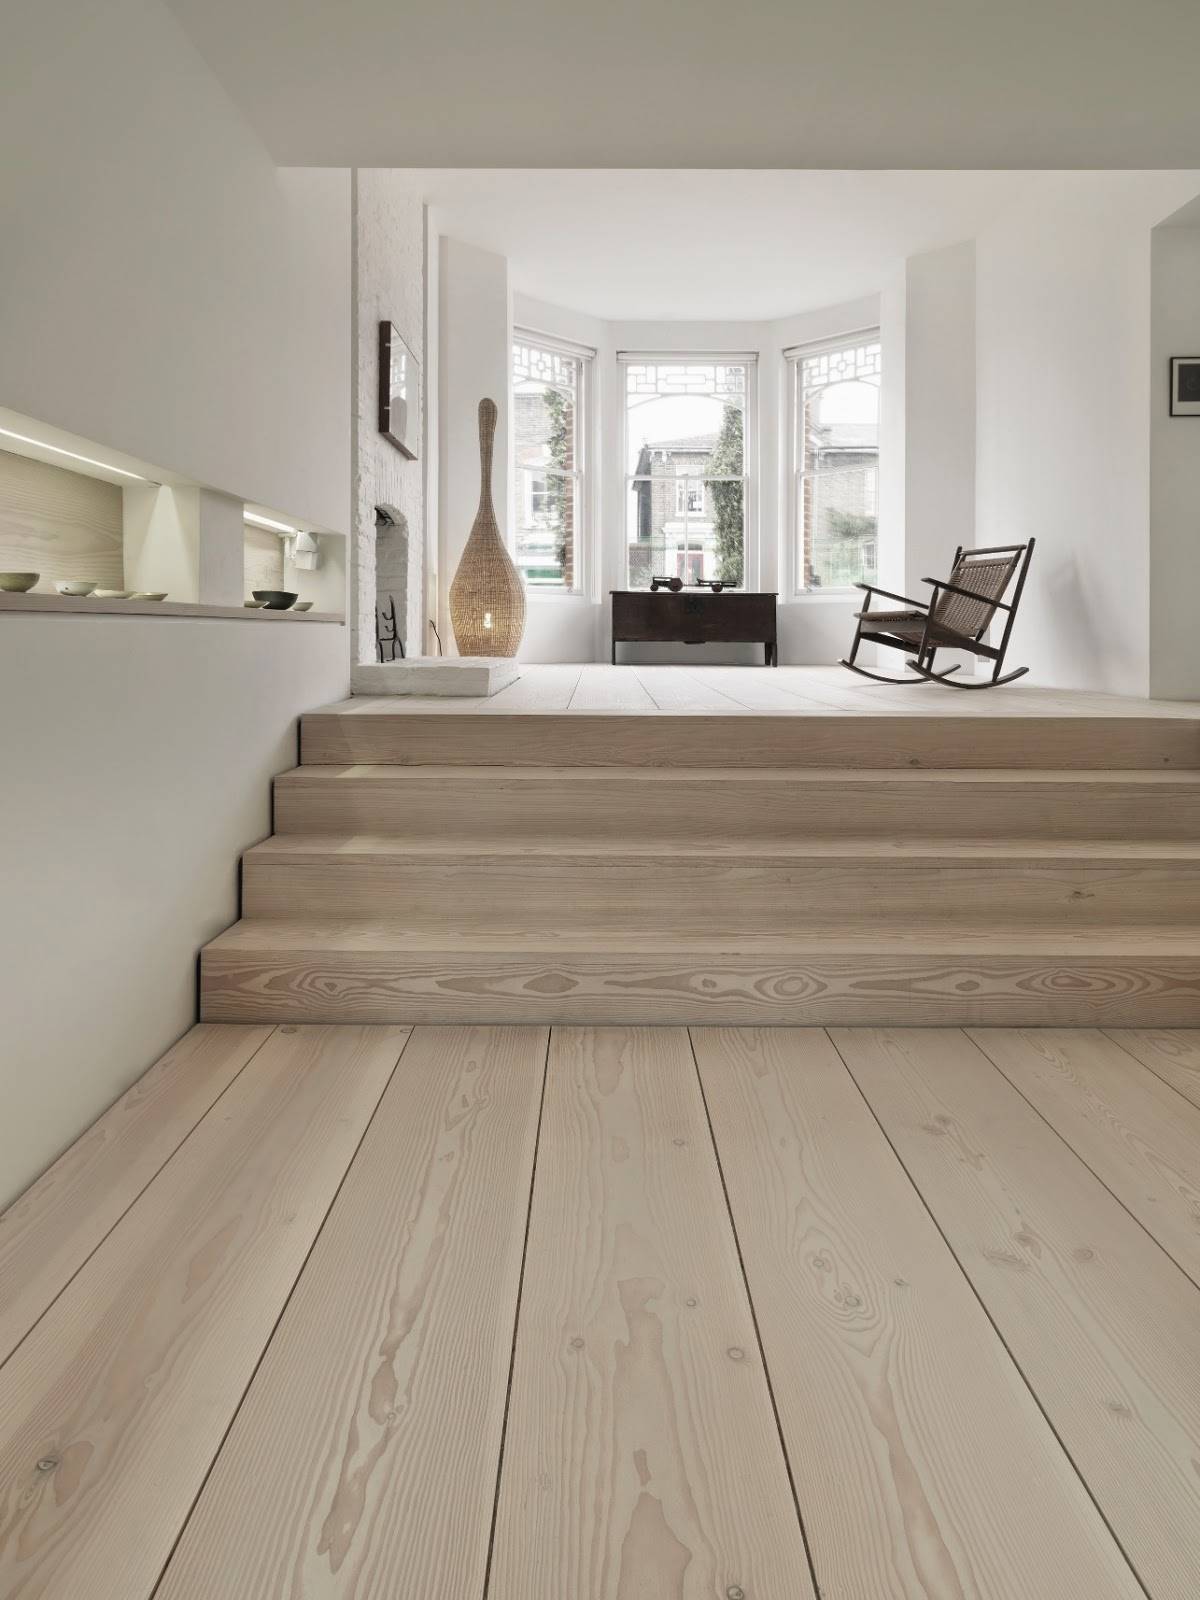 30 Ideas to Renovate the Floor Without Works